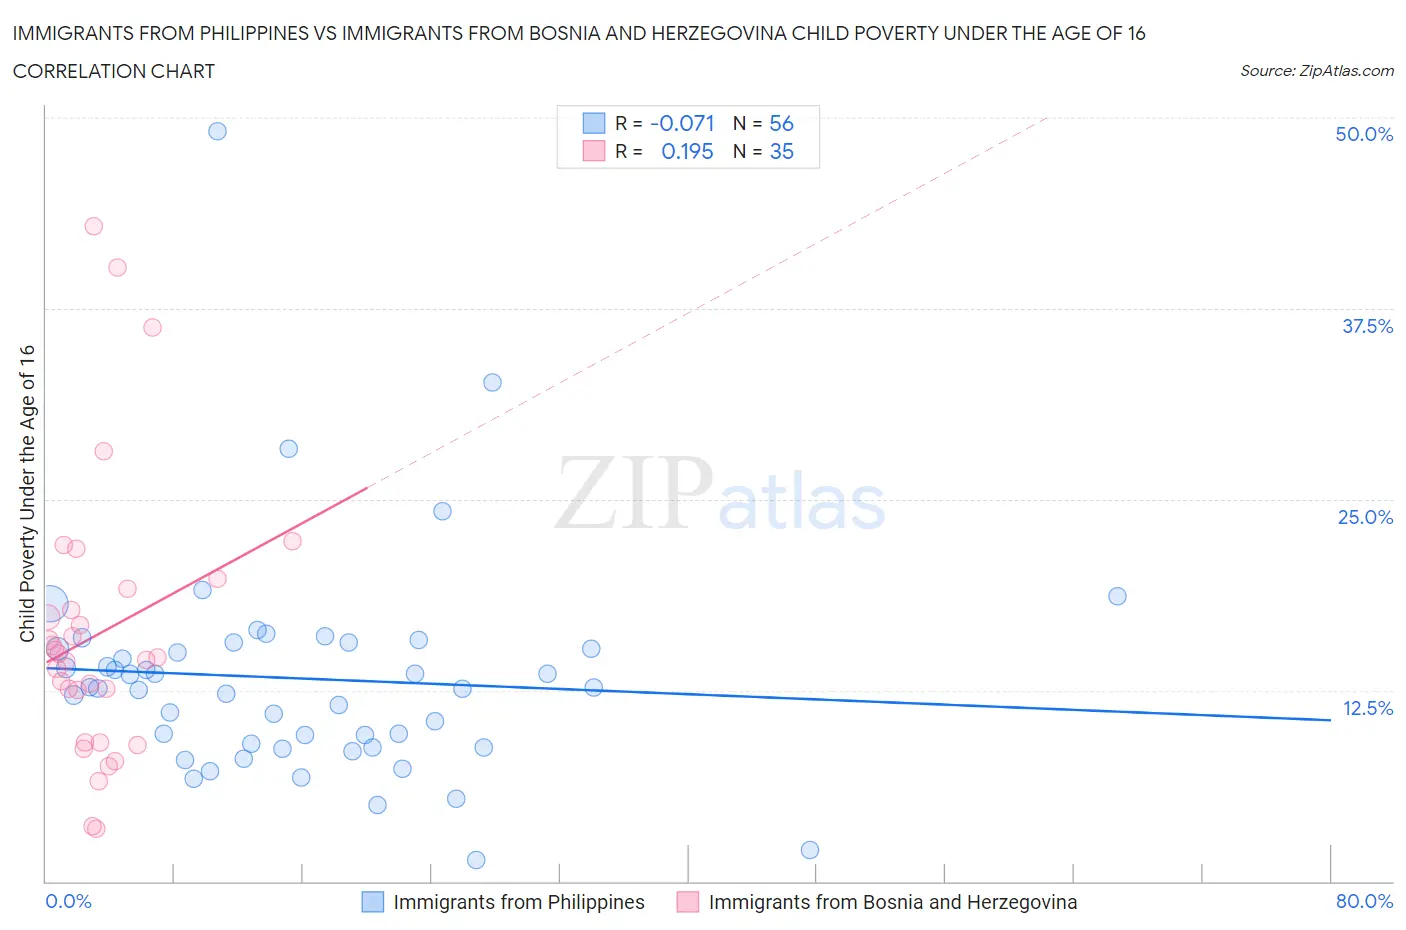 Immigrants from Philippines vs Immigrants from Bosnia and Herzegovina Child Poverty Under the Age of 16